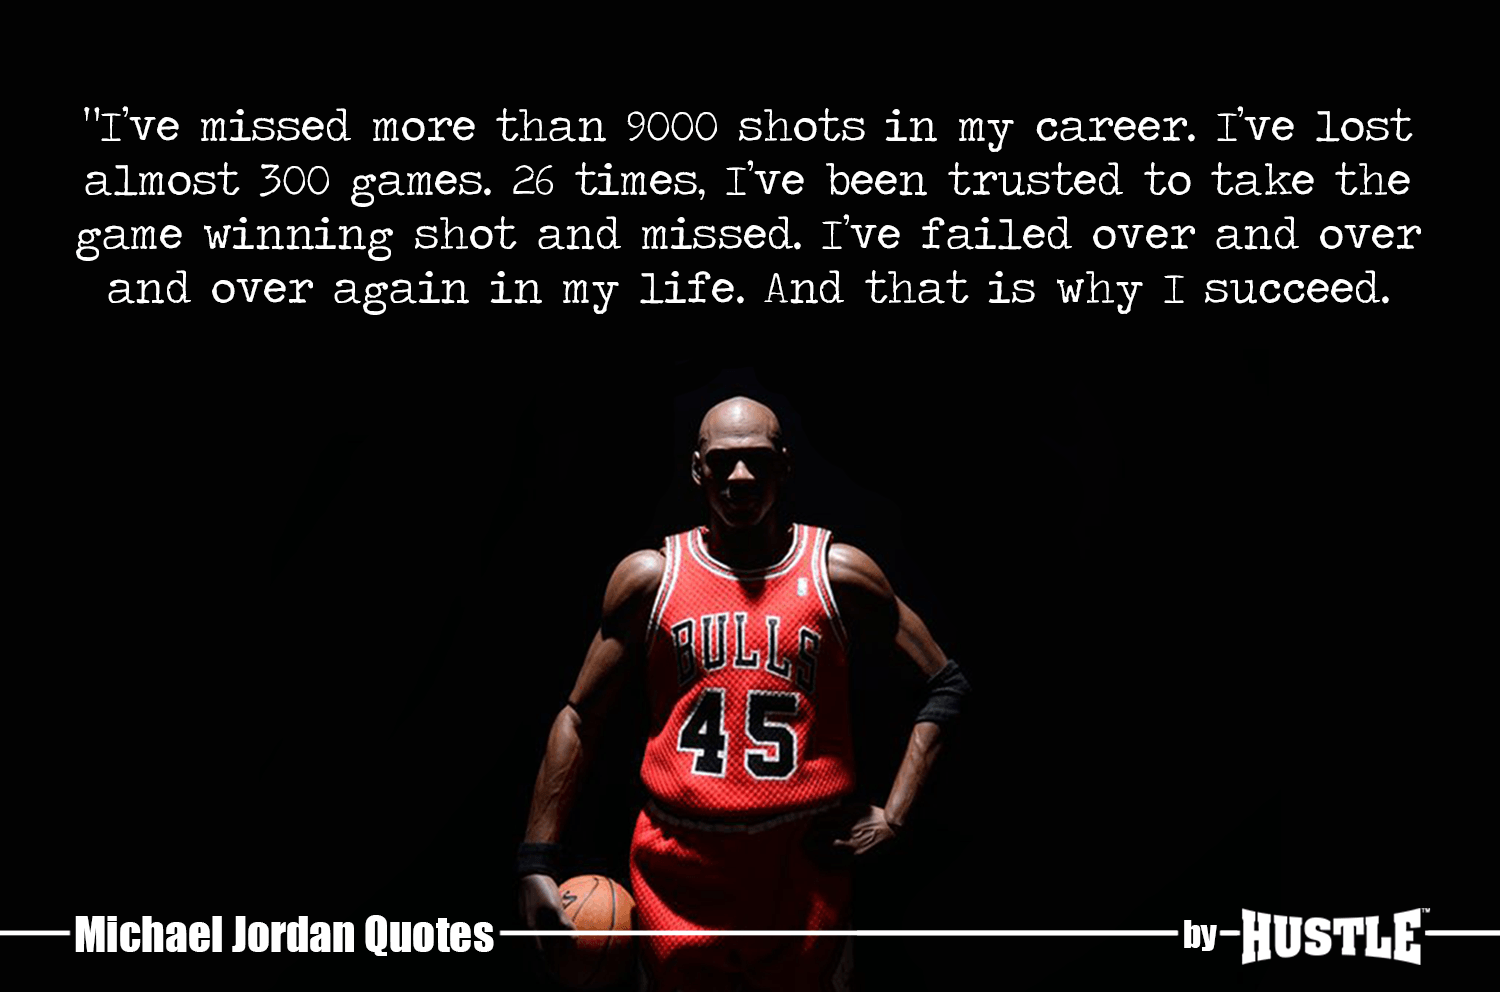 Quotes By Michael Jordan That Can Bring Huge Change